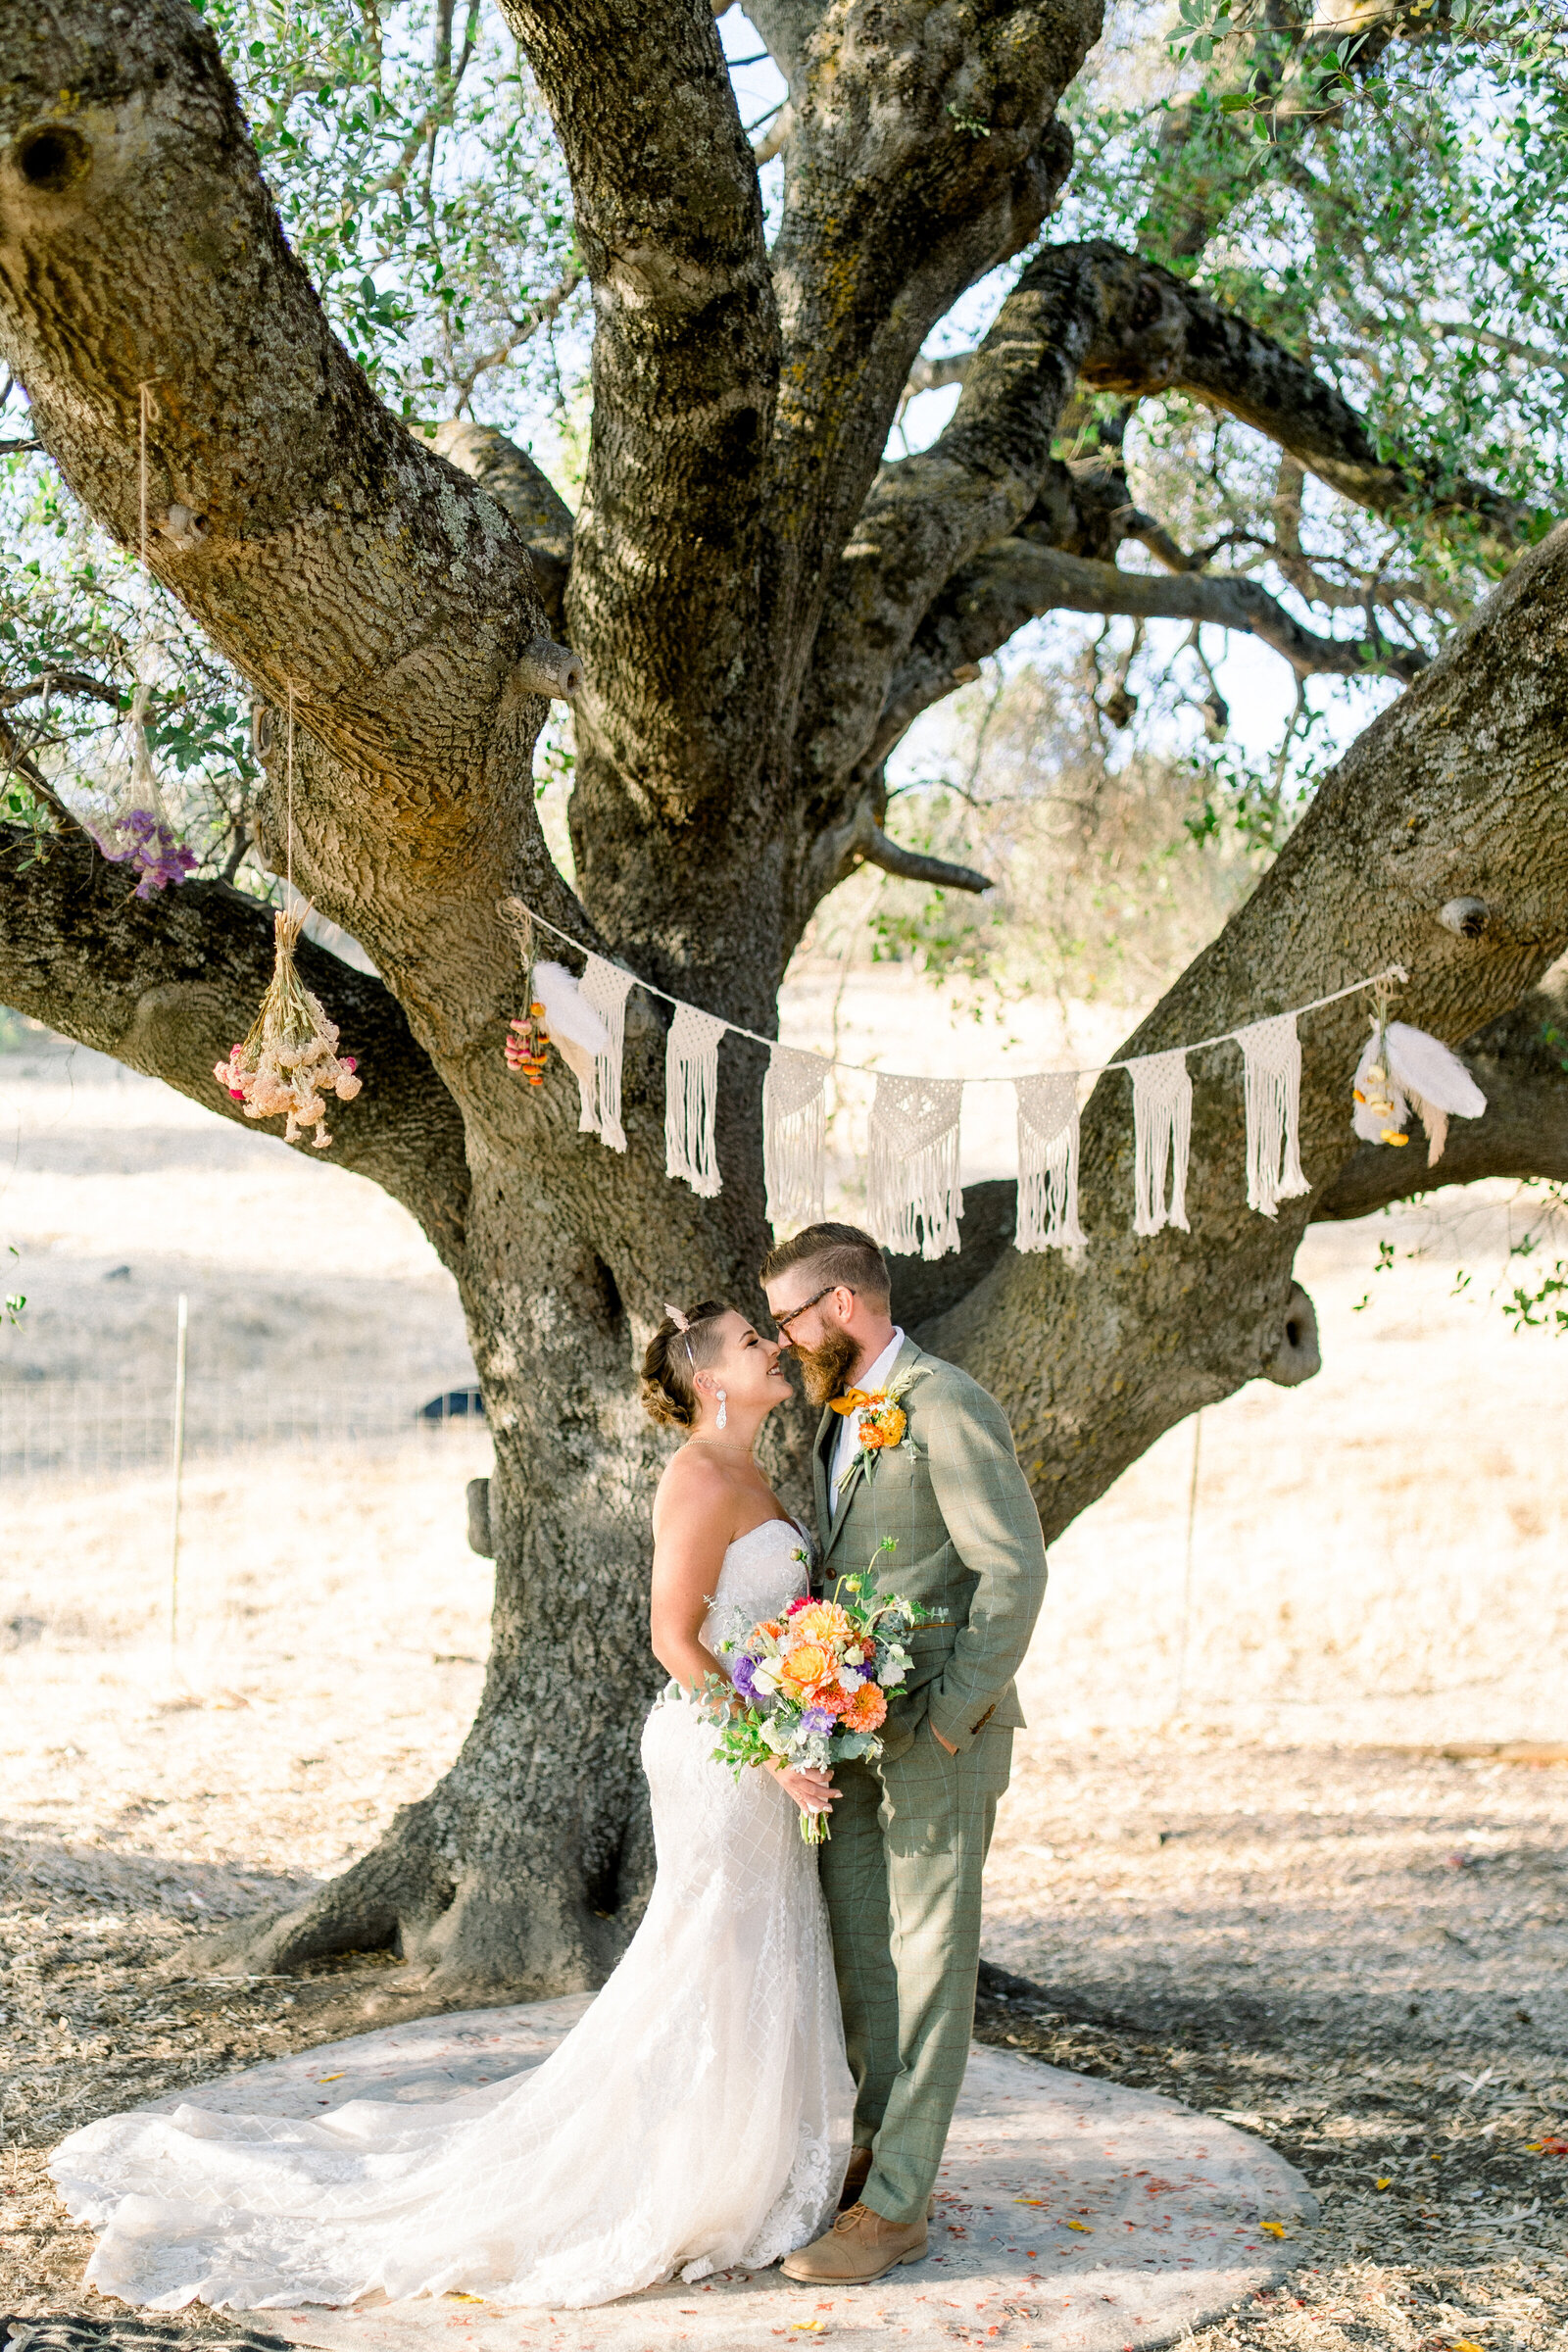 Bride and groom under the oak tree at their wedding at The Maples in Woodland, CA